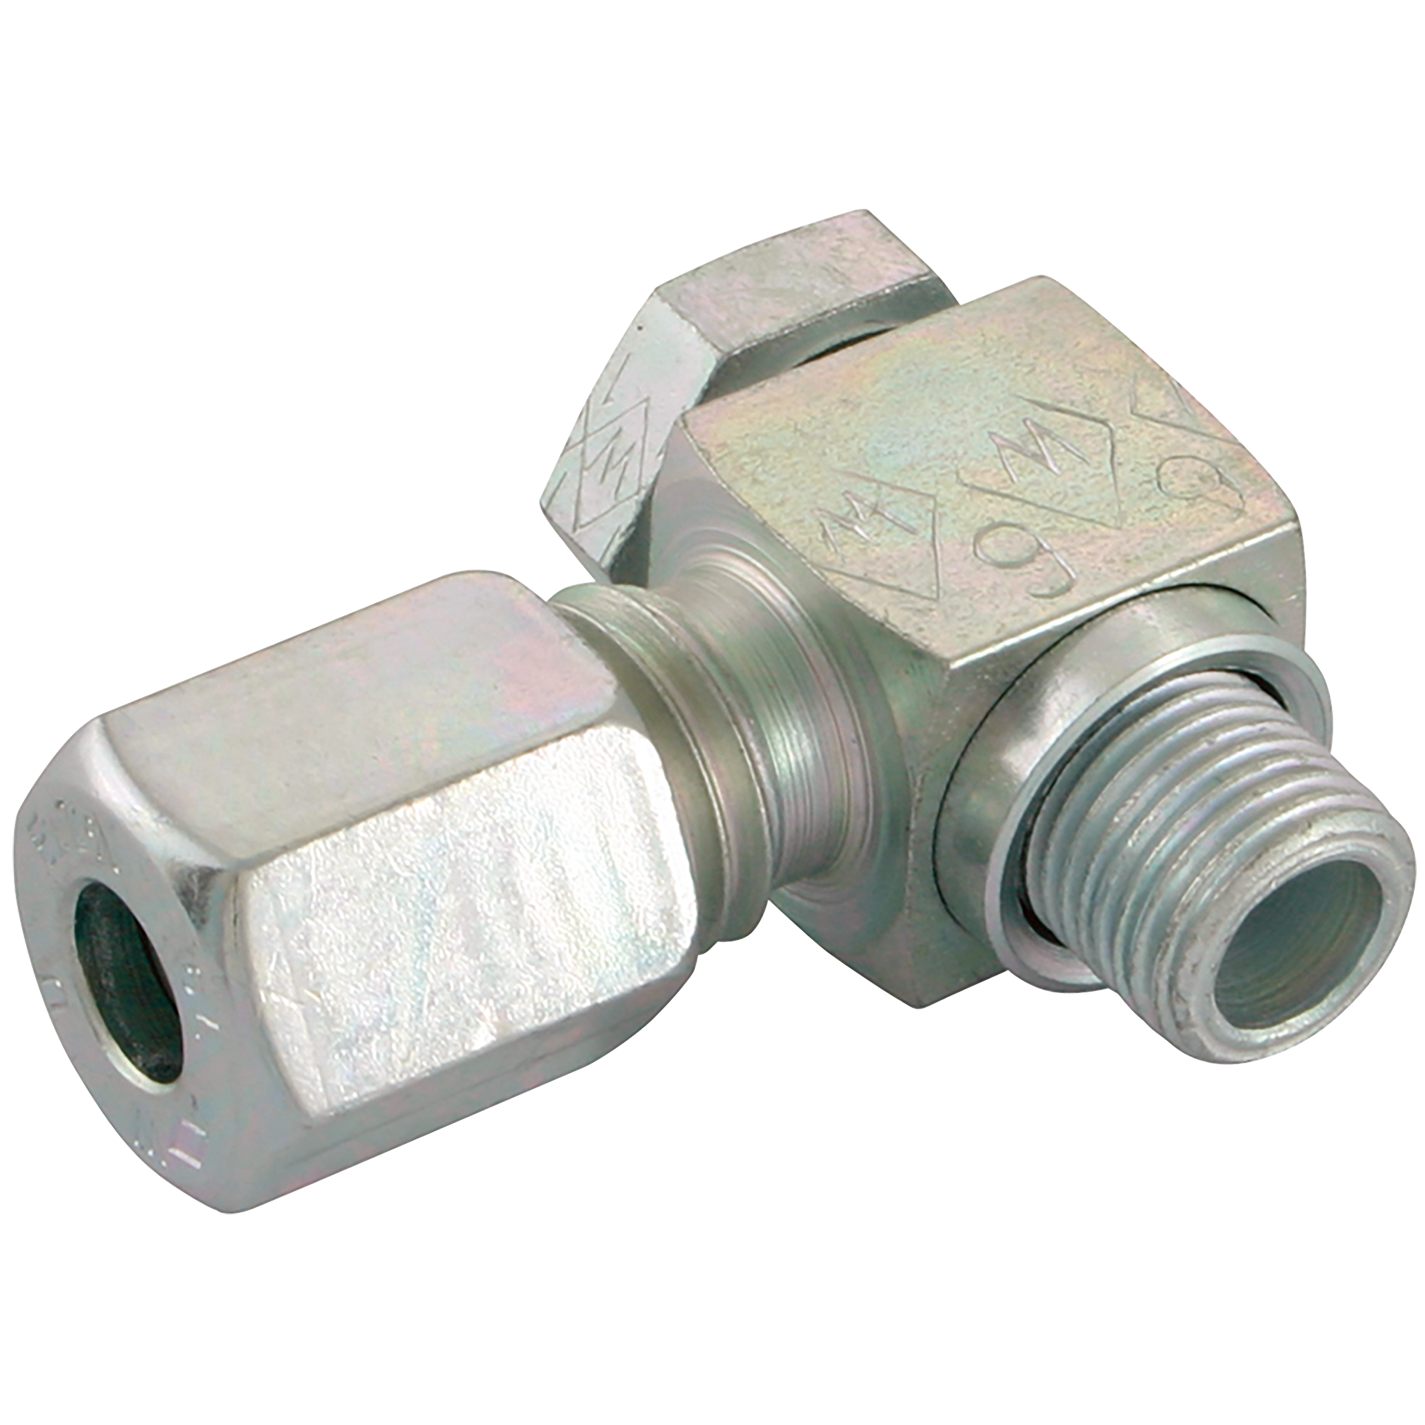 Providers of Hydraulic Connectors